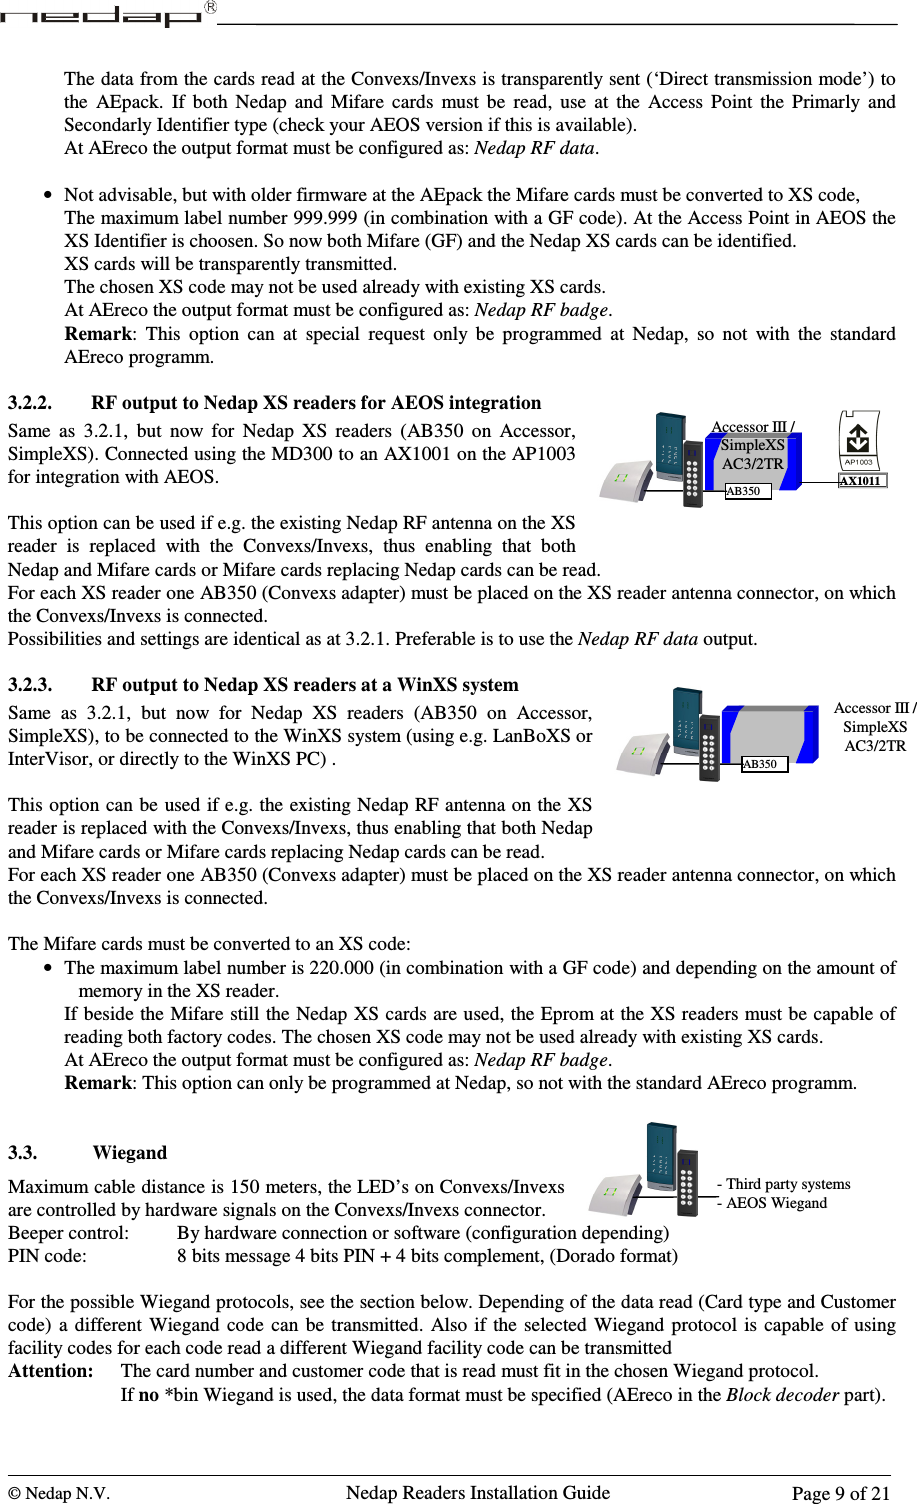  © Nedap N.V.                   Nedap Readers Installation Guide      Page 9 of 21 Accessor III / SimpleXS AC3/2TR AB350 AX1011 The data from the cards read at the Convexs/Invexs is transparently sent (‘Direct transmission mode’) to the  AEpack.  If  both  Nedap  and  Mifare  cards  must  be  read,  use  at  the  Access  Point  the  Primarly  and Secondarly Identifier type (check your AEOS version if this is available). At AEreco the output format must be configured as: Nedap RF data.  • Not advisable, but with older firmware at the AEpack the Mifare cards must be converted to XS code, The maximum label number 999.999 (in combination with a GF code). At the Access Point in AEOS the XS Identifier is choosen. So now both Mifare (GF) and the Nedap XS cards can be identified.  XS cards will be transparently transmitted. The chosen XS code may not be used already with existing XS cards. At AEreco the output format must be configured as: Nedap RF badge. Remark:  This  option  can  at  special  request  only  be  programmed  at  Nedap,  so  not  with  the  standard AEreco programm.   3.2.2. RF output to Nedap XS readers for AEOS integration Same  as  3.2.1,  but  now  for  Nedap  XS  readers  (AB350  on  Accessor, SimpleXS). Connected using the MD300 to an AX1001 on the AP1003 for integration with AEOS.  This option can be used if e.g. the existing Nedap RF antenna on the XS reader  is  replaced  with  the  Convexs/Invexs,  thus  enabling  that  both Nedap and Mifare cards or Mifare cards replacing Nedap cards can be read. For each XS reader one AB350 (Convexs adapter) must be placed on the XS reader antenna connector, on which the Convexs/Invexs is connected.  Possibilities and settings are identical as at 3.2.1. Preferable is to use the Nedap RF data output.  3.2.3. RF output to Nedap XS readers at a WinXS system Same  as  3.2.1,  but  now  for  Nedap  XS  readers  (AB350  on  Accessor, SimpleXS), to be connected to the WinXS system (using e.g. LanBoXS or InterVisor, or directly to the WinXS PC) .  This option can be  used if e.g. the existing Nedap RF antenna on the XS reader is replaced with the Convexs/Invexs, thus enabling that both Nedap and Mifare cards or Mifare cards replacing Nedap cards can be read. For each XS reader one AB350 (Convexs adapter) must be placed on the XS reader antenna connector, on which the Convexs/Invexs is connected.  The Mifare cards must be converted to an XS code: • The maximum label number is 220.000 (in combination with a GF code) and depending on the amount of memory in the XS reader. If beside the Mifare still the Nedap XS cards are used, the Eprom at the XS readers must be capable of reading both factory codes. The chosen XS code may not be used already with existing XS cards. At AEreco the output format must be configured as: Nedap RF badge. Remark: This option can only be programmed at Nedap, so not with the standard AEreco programm.    3.3. Wiegand Maximum cable distance is 150 meters, the LED’s on Convexs/Invexs are controlled by hardware signals on the Convexs/Invexs connector.  Beeper control:    By hardware connection or software (configuration depending) PIN code:       8 bits message 4 bits PIN + 4 bits complement, (Dorado format)  For the possible Wiegand protocols, see the section below. Depending of the data read (Card type and Customer code)  a  different  Wiegand  code  can  be  transmitted.  Also if  the  selected Wiegand protocol  is  capable of using facility codes for each code read a different Wiegand facility code can be transmitted Attention:  The card number and customer code that is read must fit in the chosen Wiegand protocol.     If no *bin Wiegand is used, the data format must be specified (AEreco in the Block decoder part).  - Third party systems - AEOS Wiegand Accessor III / SimpleXS AC3/2TR AB350 123456789C0E123456789C0E123456789C0E